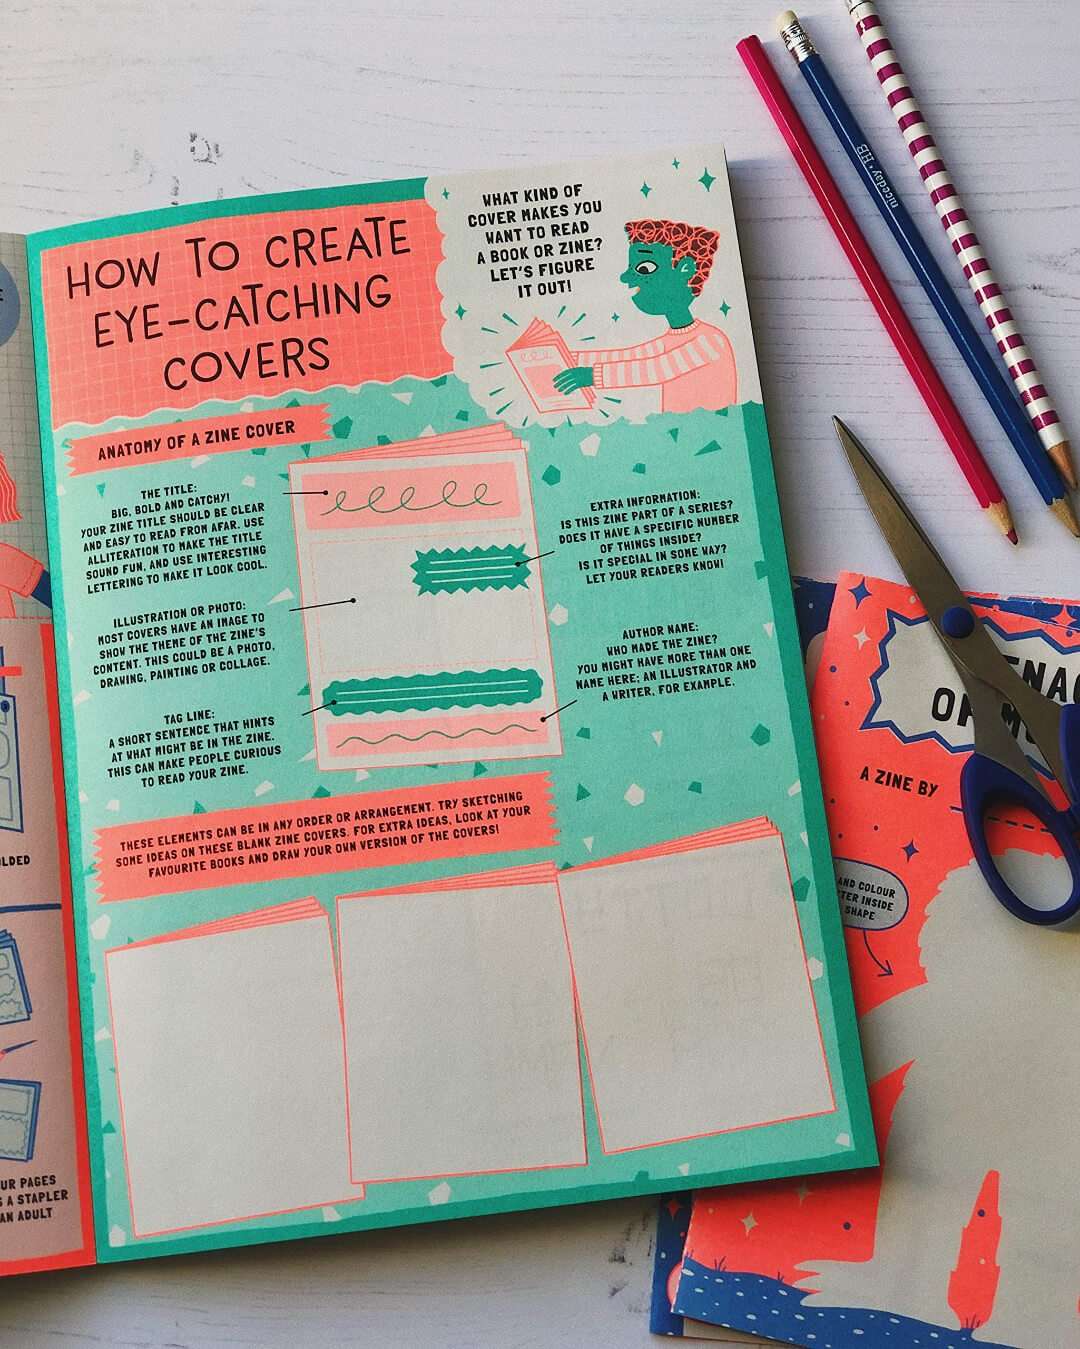 Read All About It: 10 Mini-Magazines to Make + Share